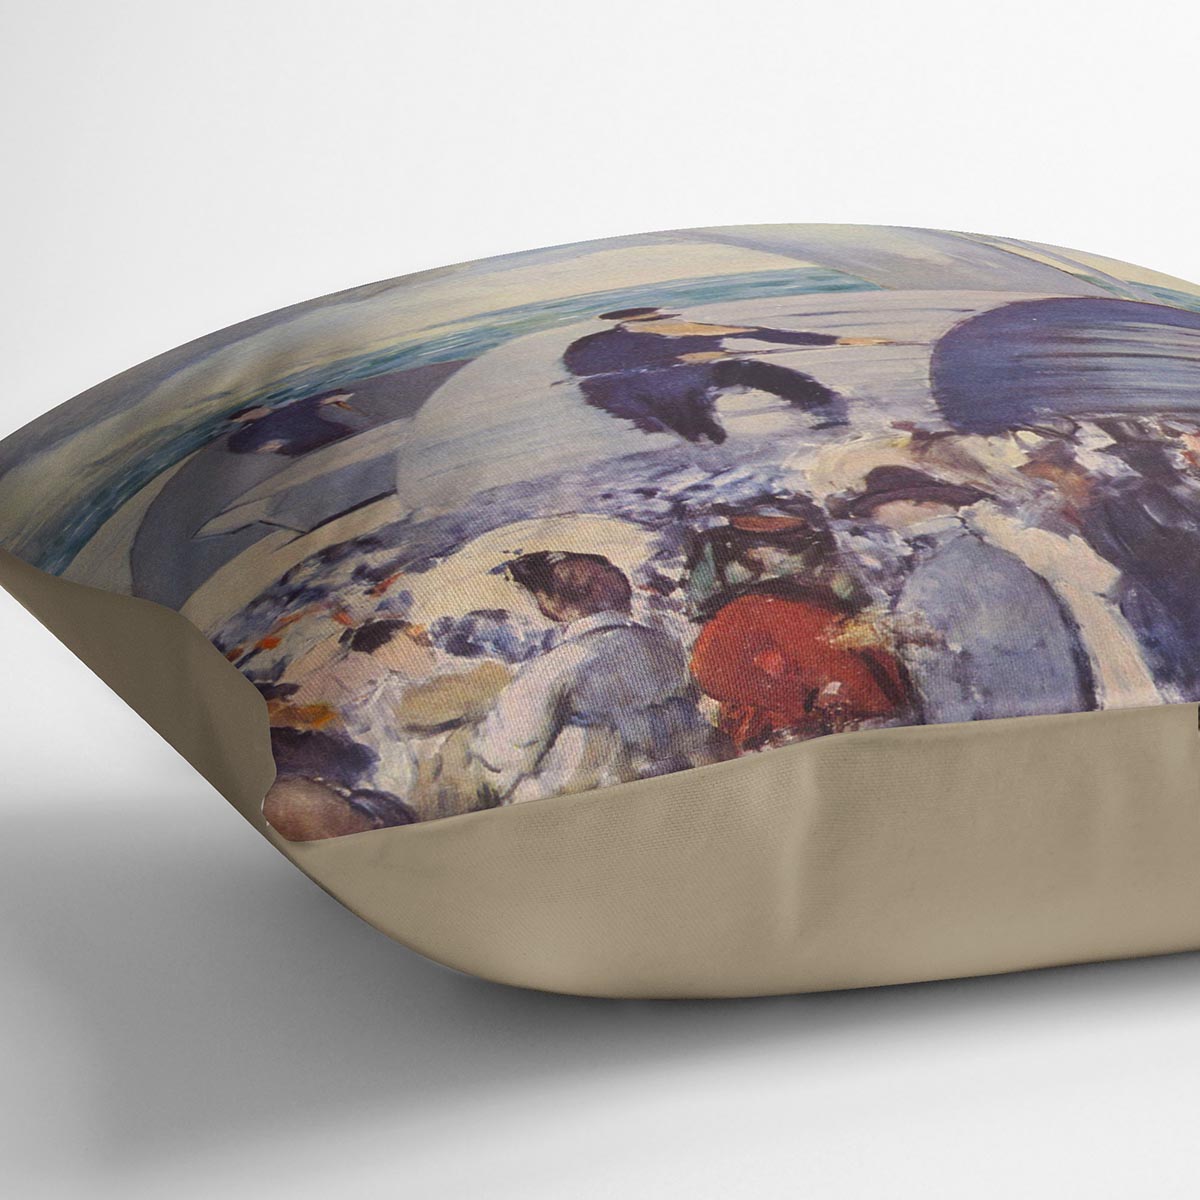 Embarkation after Folkestone by Manet Cushion